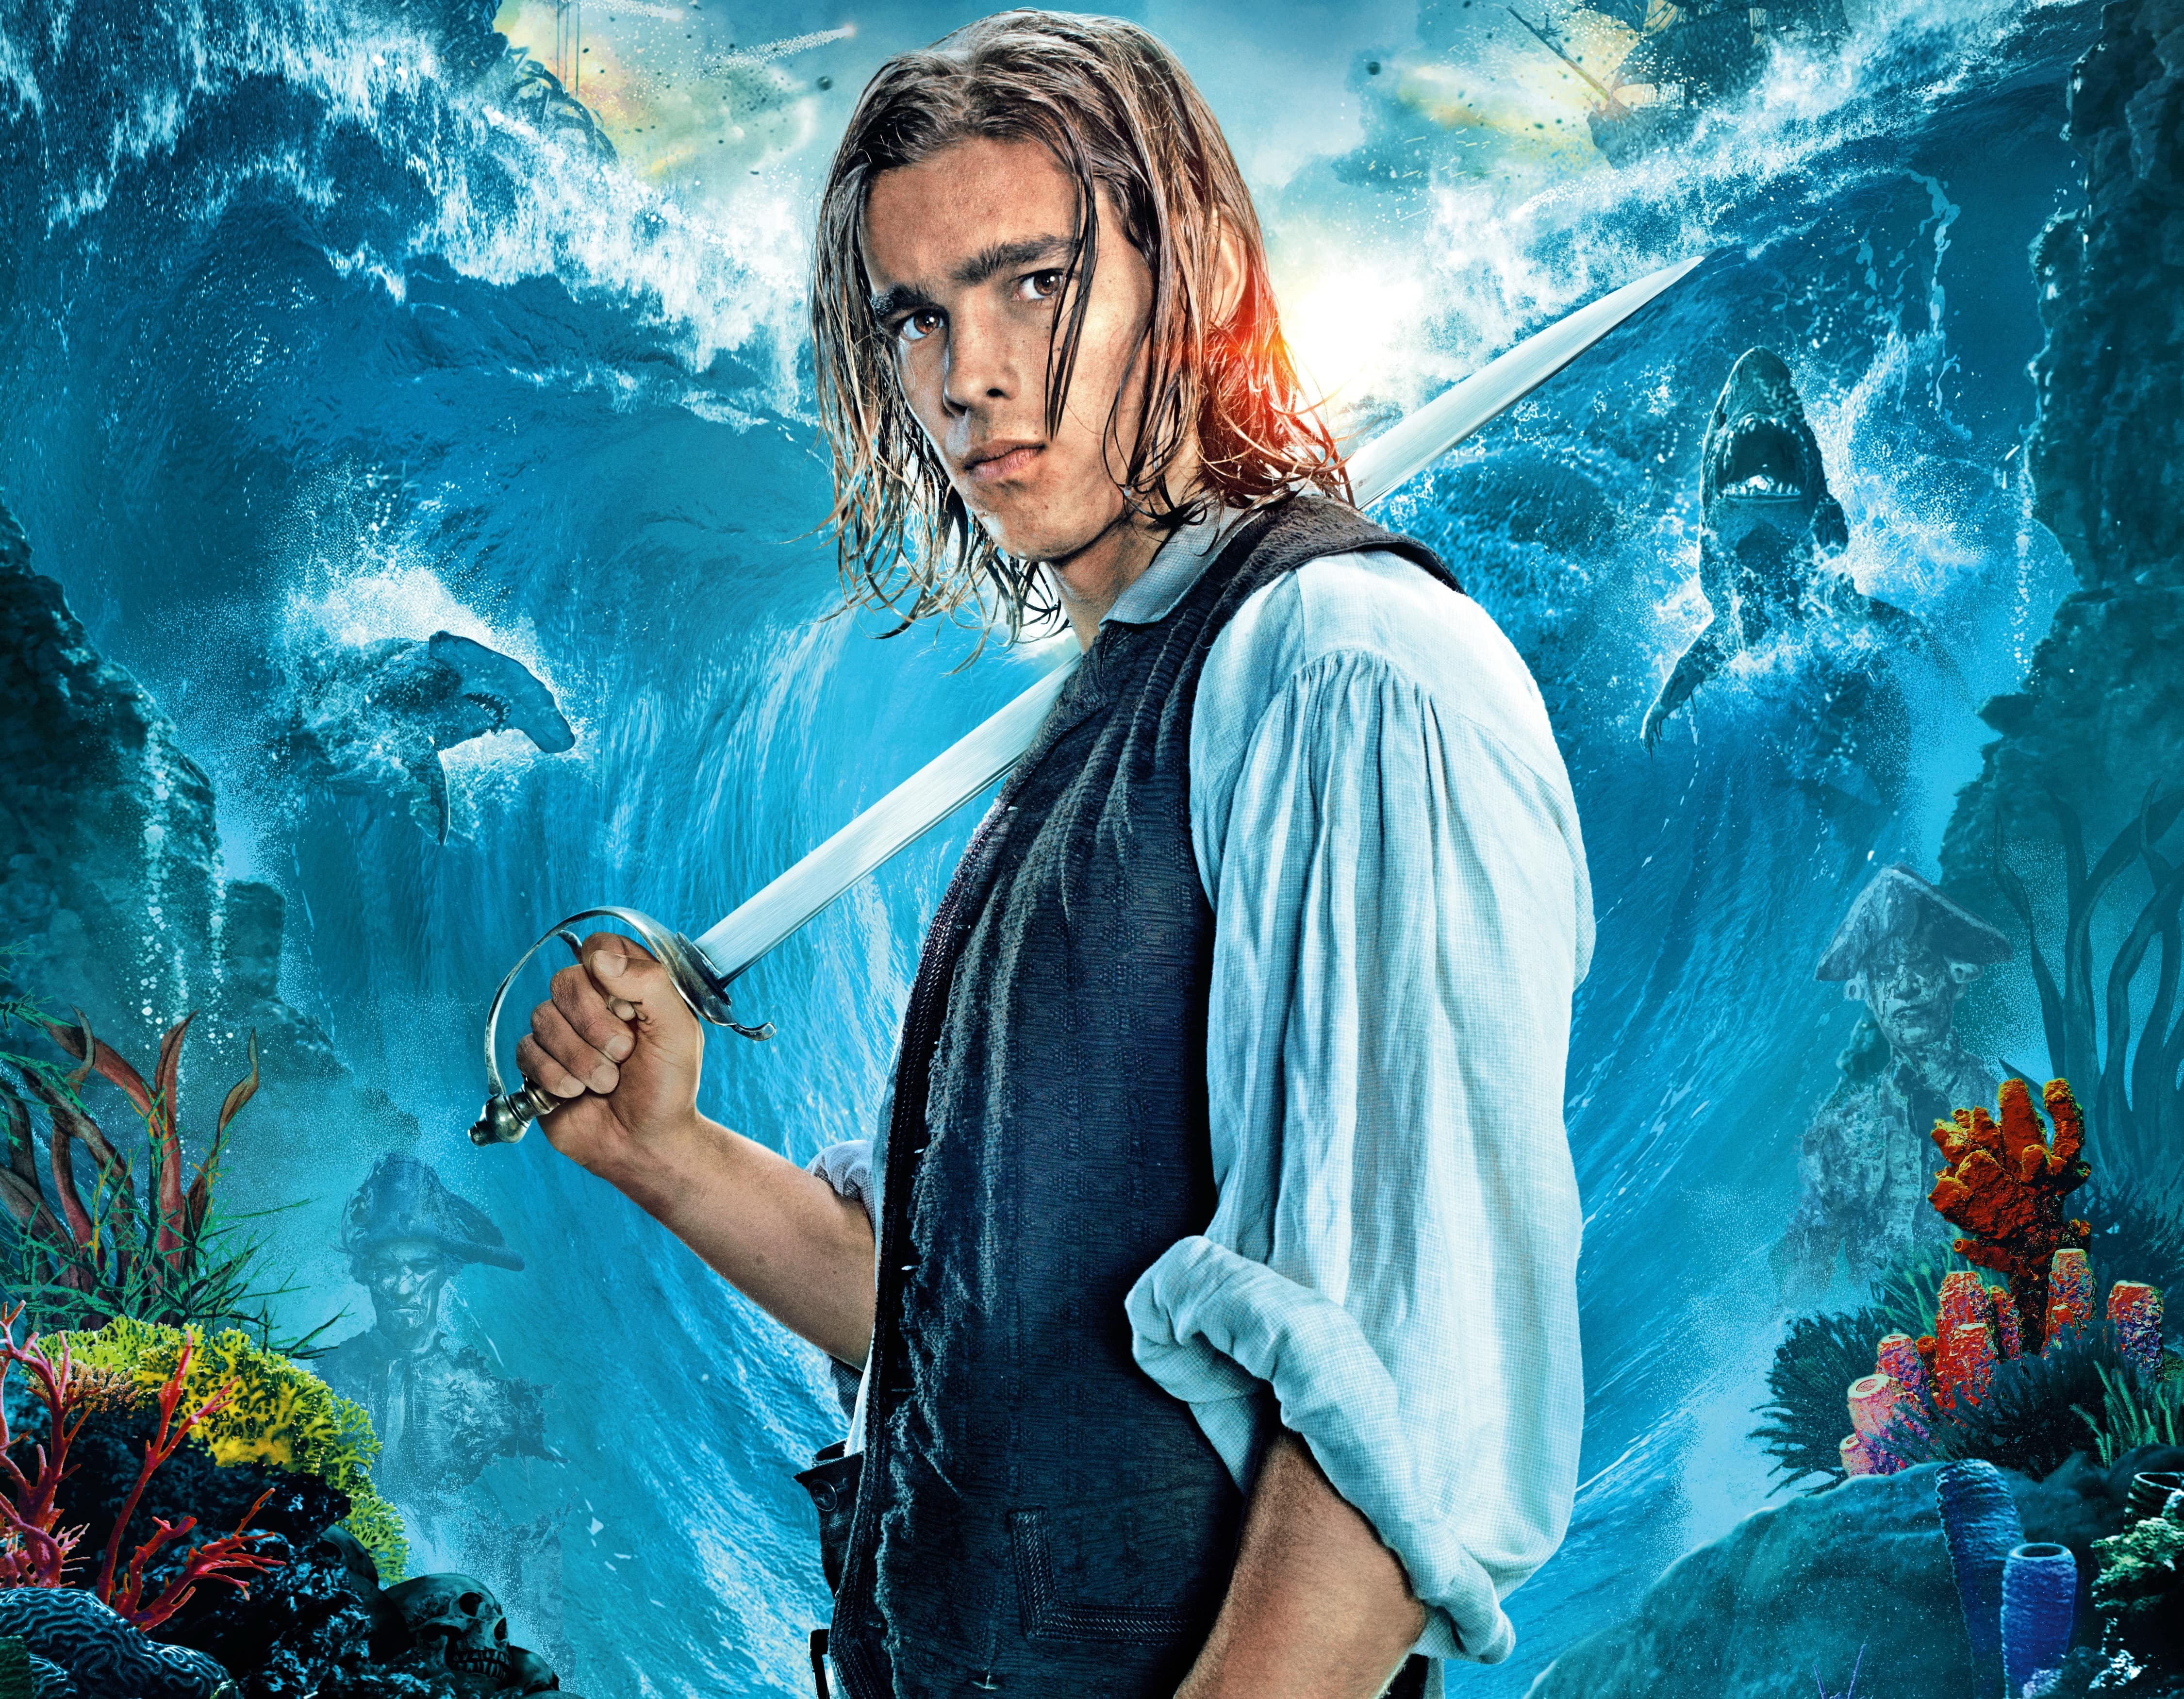 Pirates Of The Caribbean Dead Men Tell No Tales Pirates Of The Caribbean Movies Brenton Thwaites 4500x3500